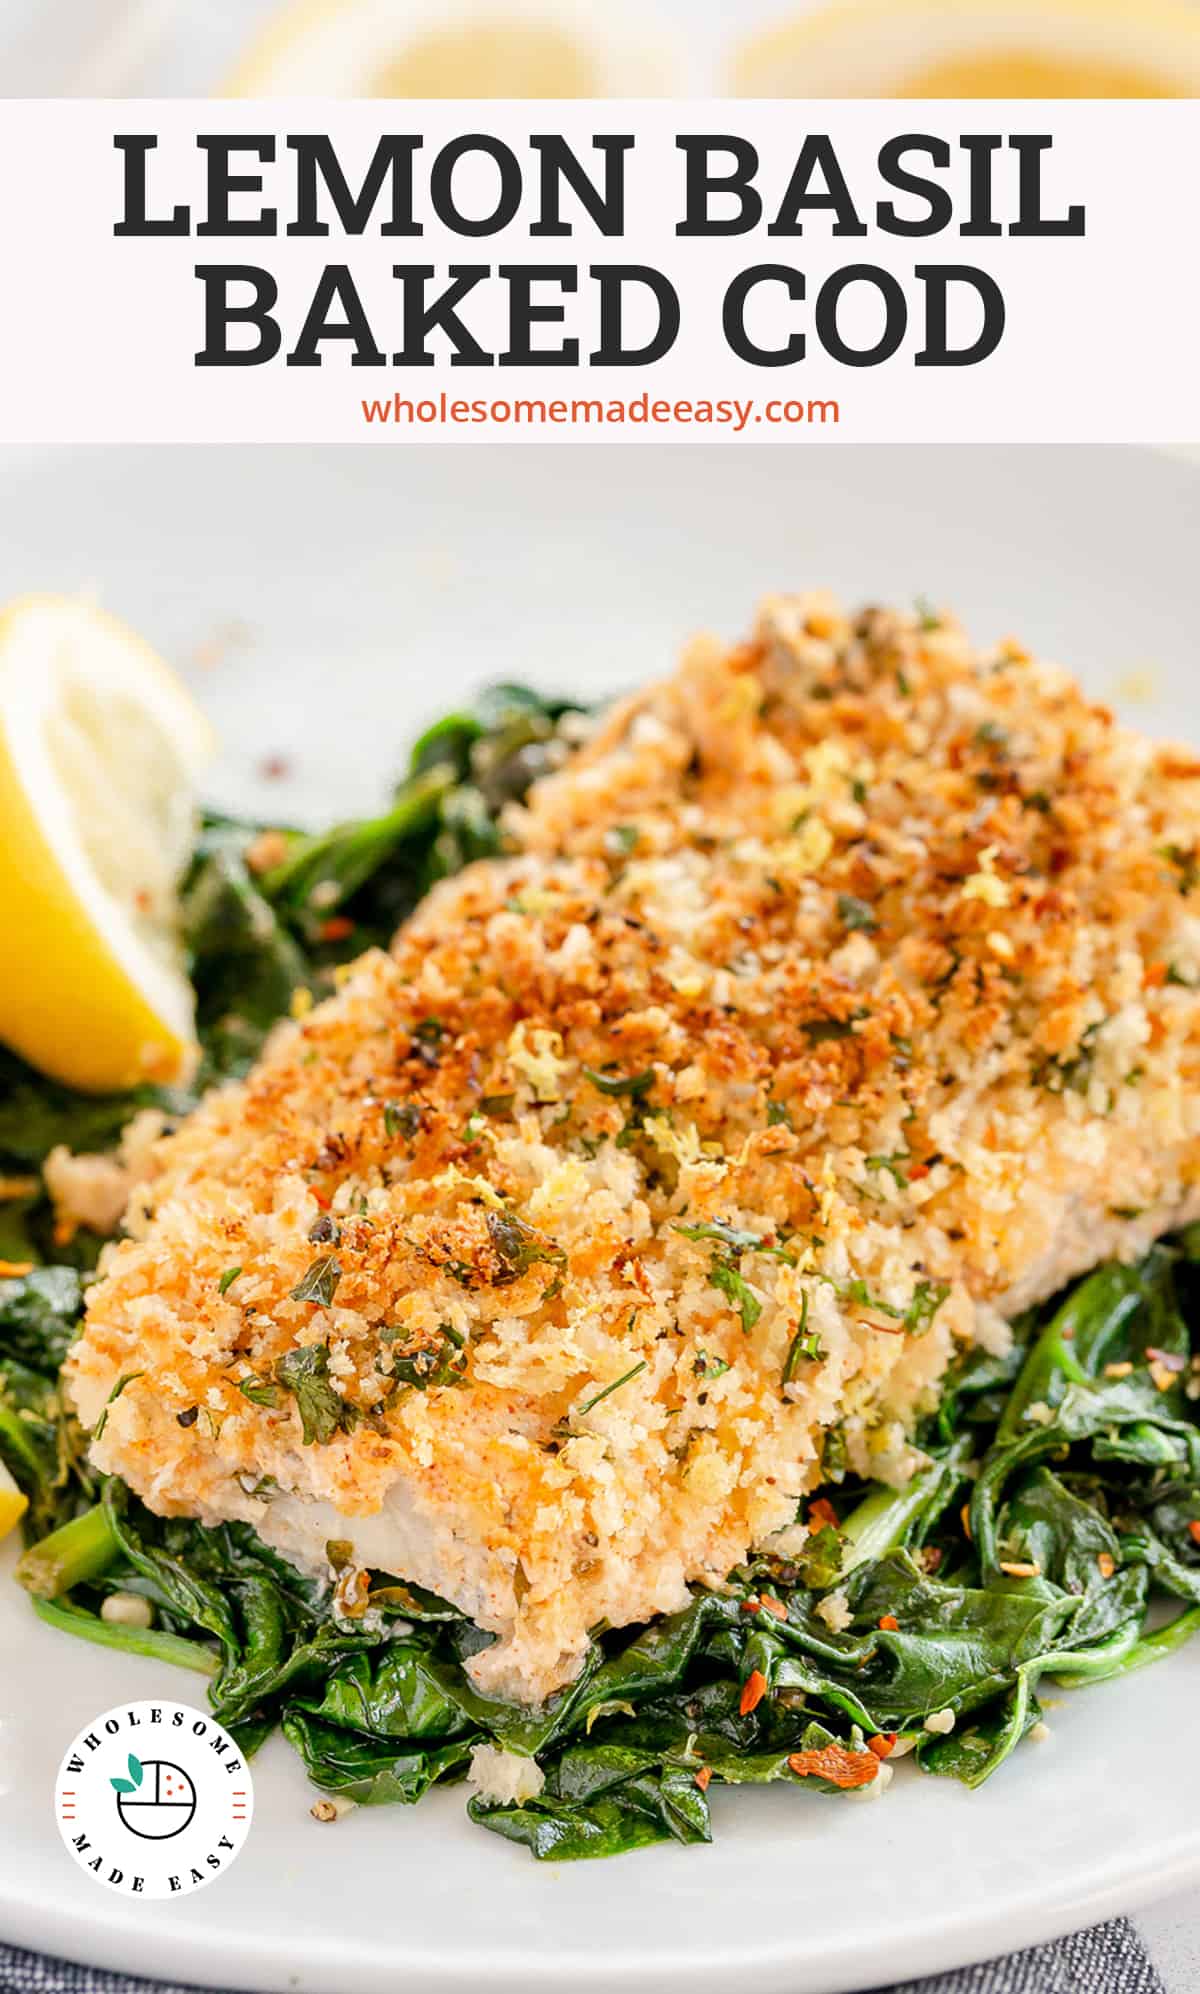 A Lemon Basil Baked Cod fillet on a bed of spinach with text overlay.